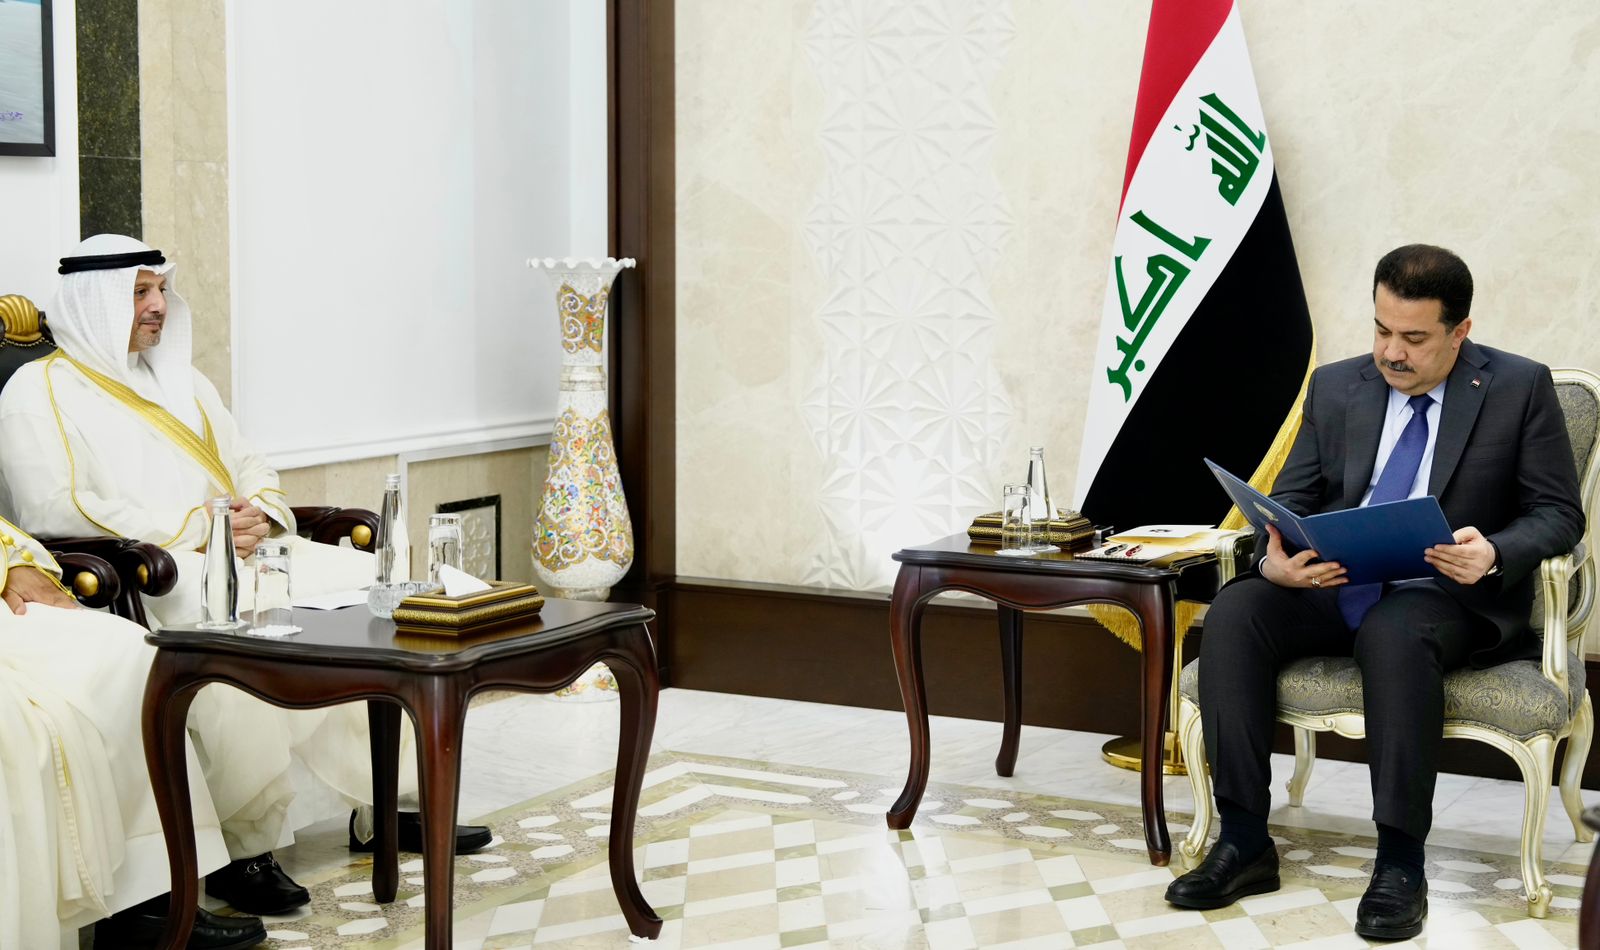 Al-Sudani receives a written letter from his Kuwaiti counterpart